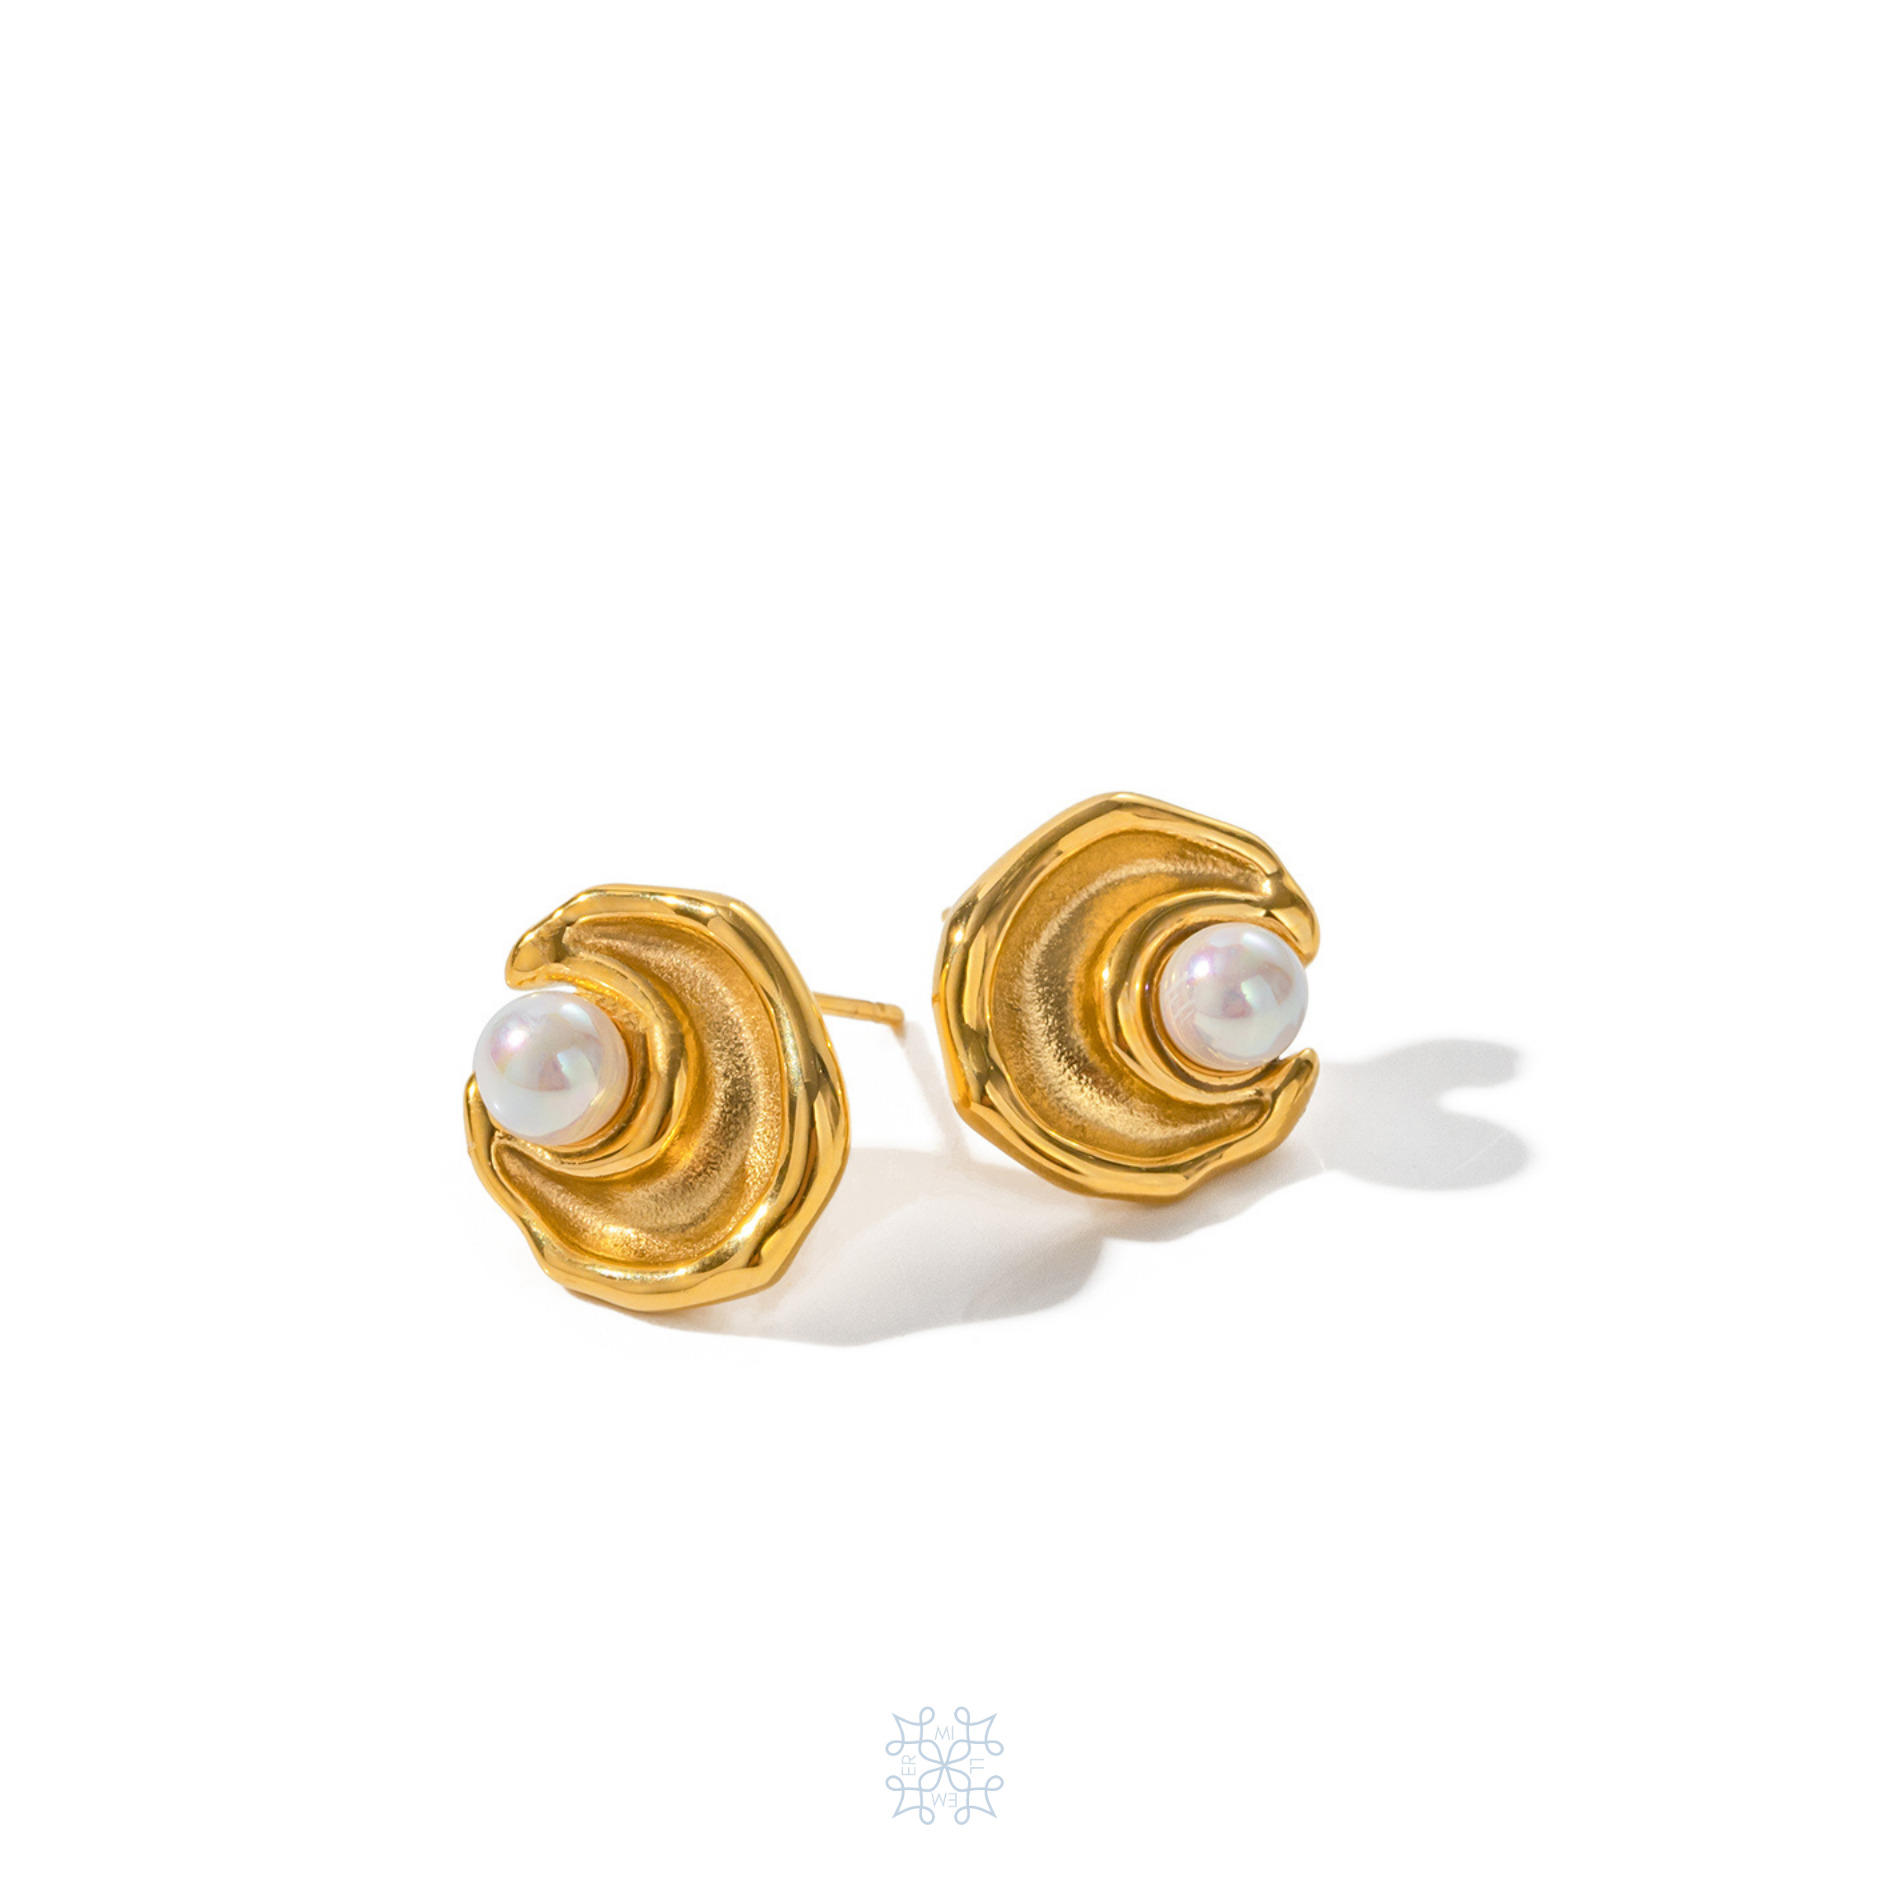 Gold Pearl Studs in the shape of a draper moon with a white pearl on the inside part of the moon. Moon Pearl Gold Stud Earrings.